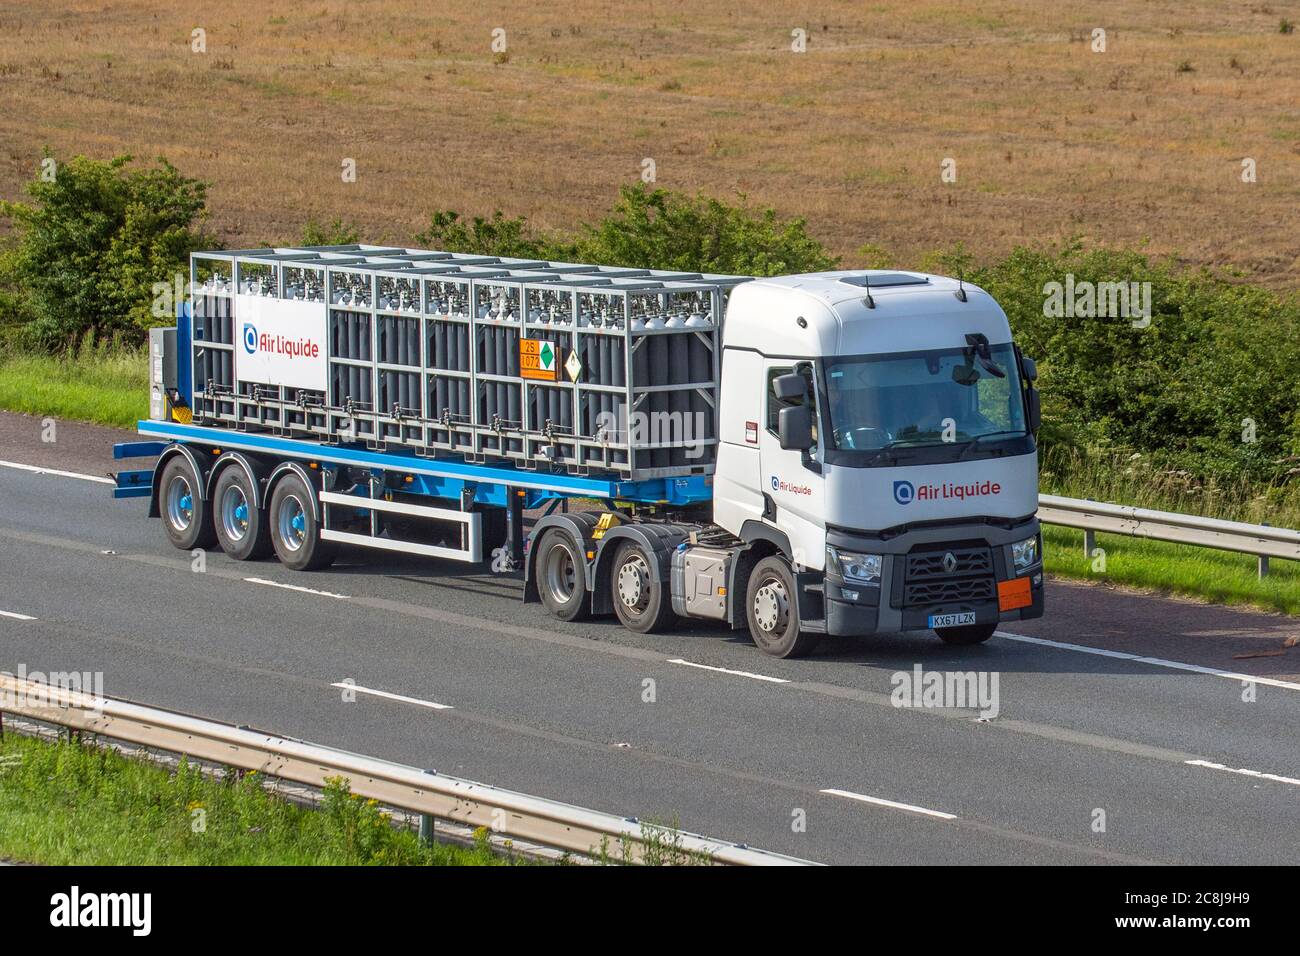 Air Liquide bottled gases, Haulage delivery trucks, lorry, transportation, truck, cargo carrier, Renault vehicle, European commercial transport, industry, M61 at Manchester, UK Stock Photo